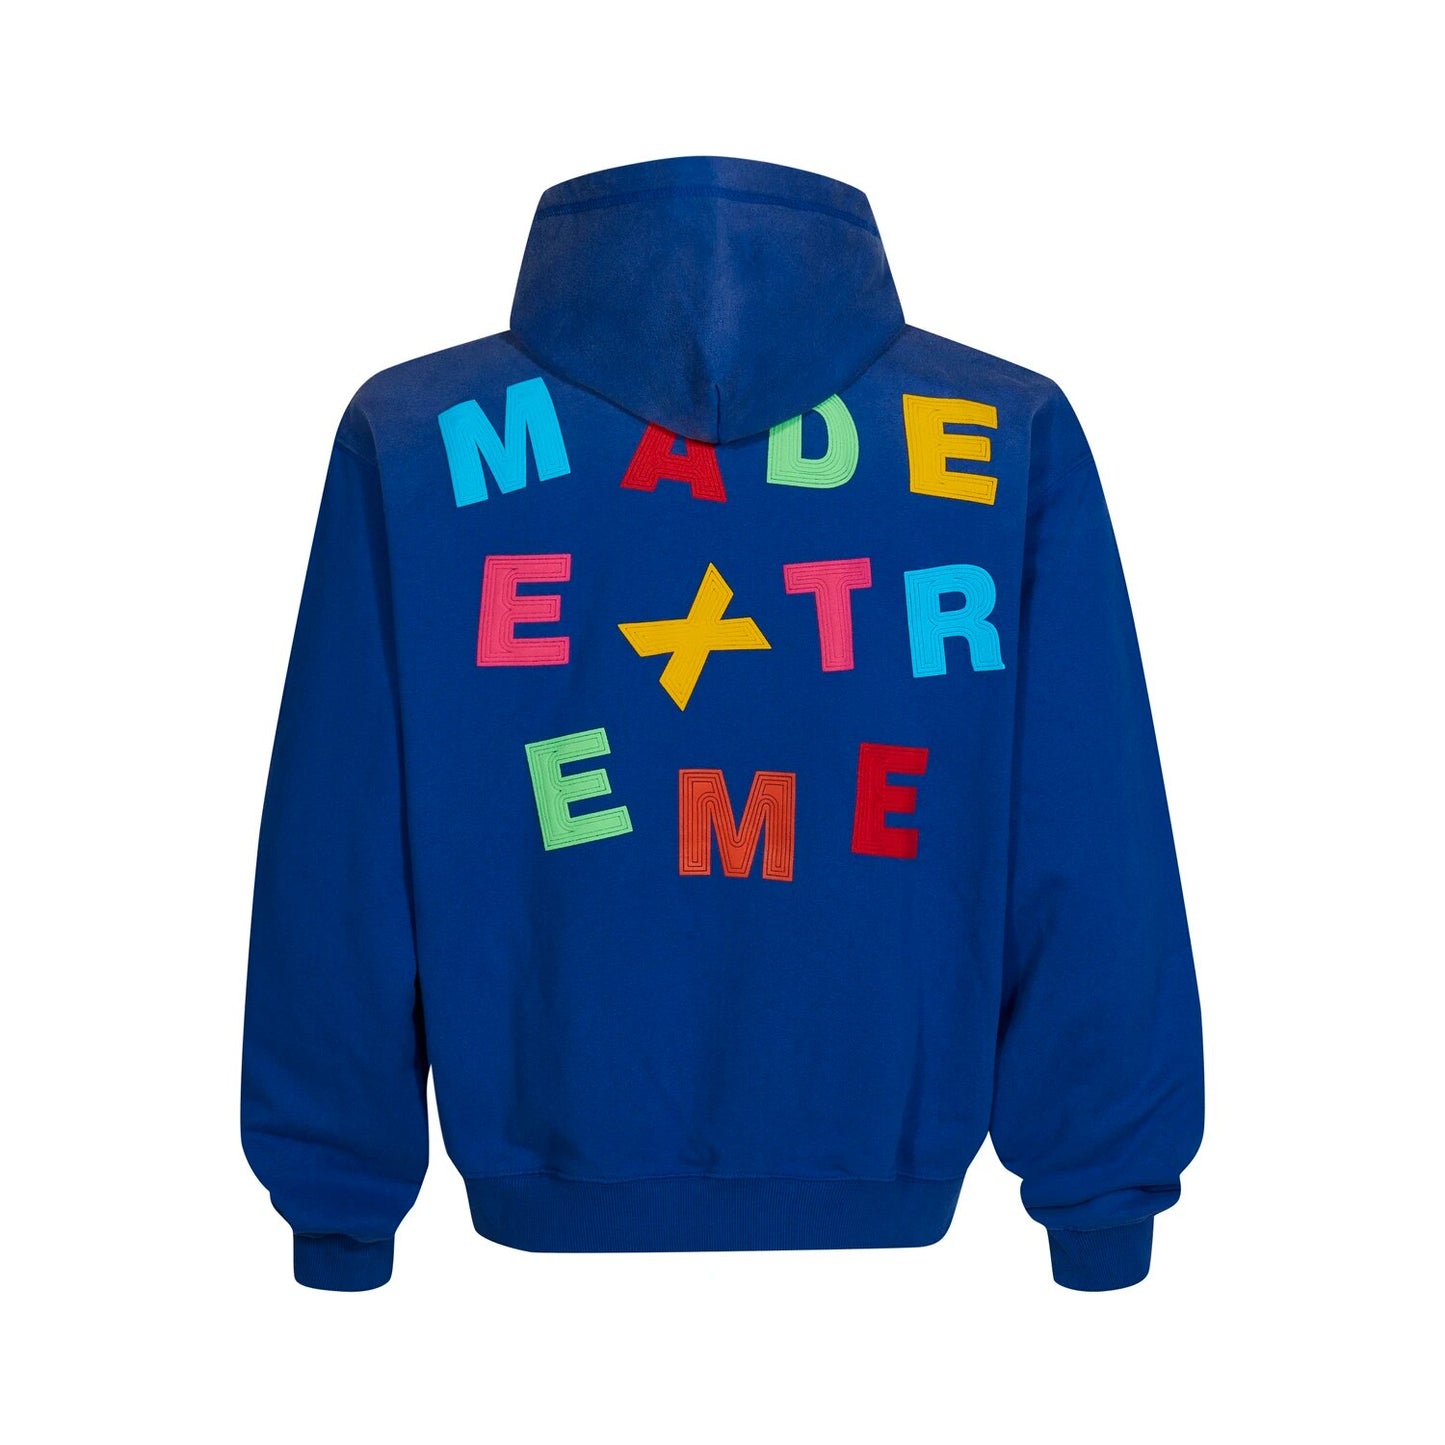 MADE EXTREME Fun Foaming Letters Velvet Zipper Hoodie